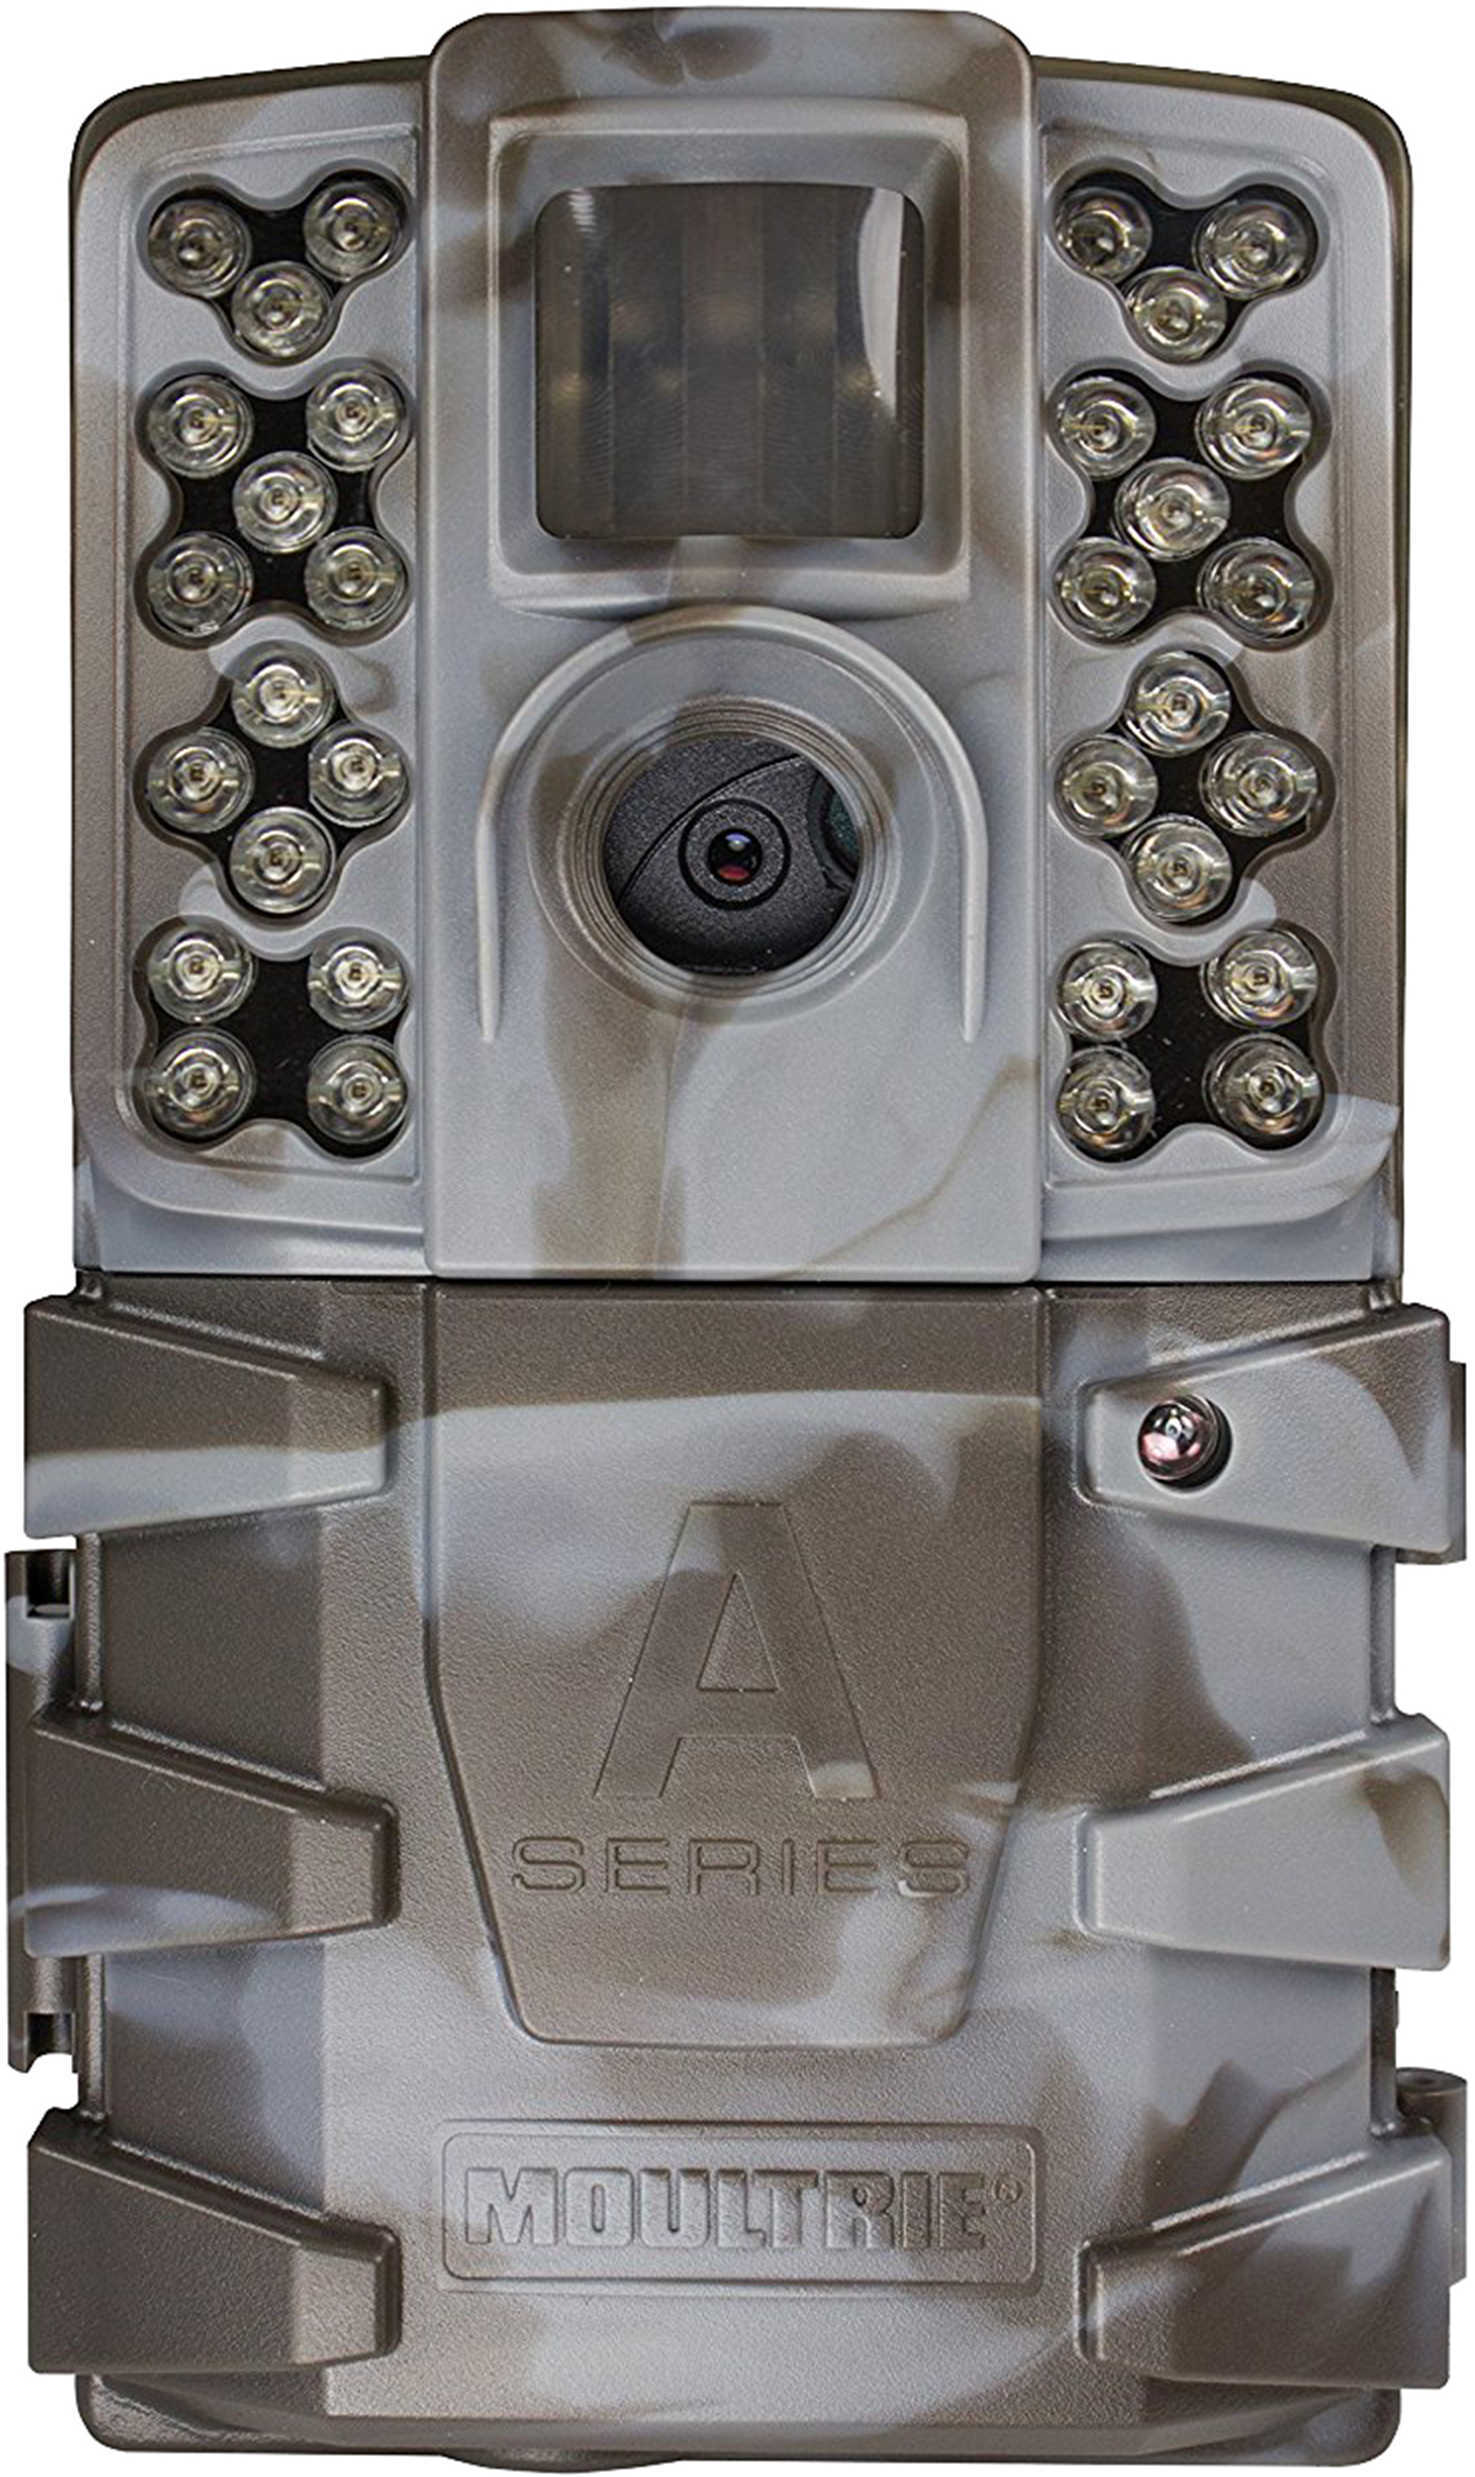 Moultrie Feeders Moultire A-35 Game Camera MCG-13212